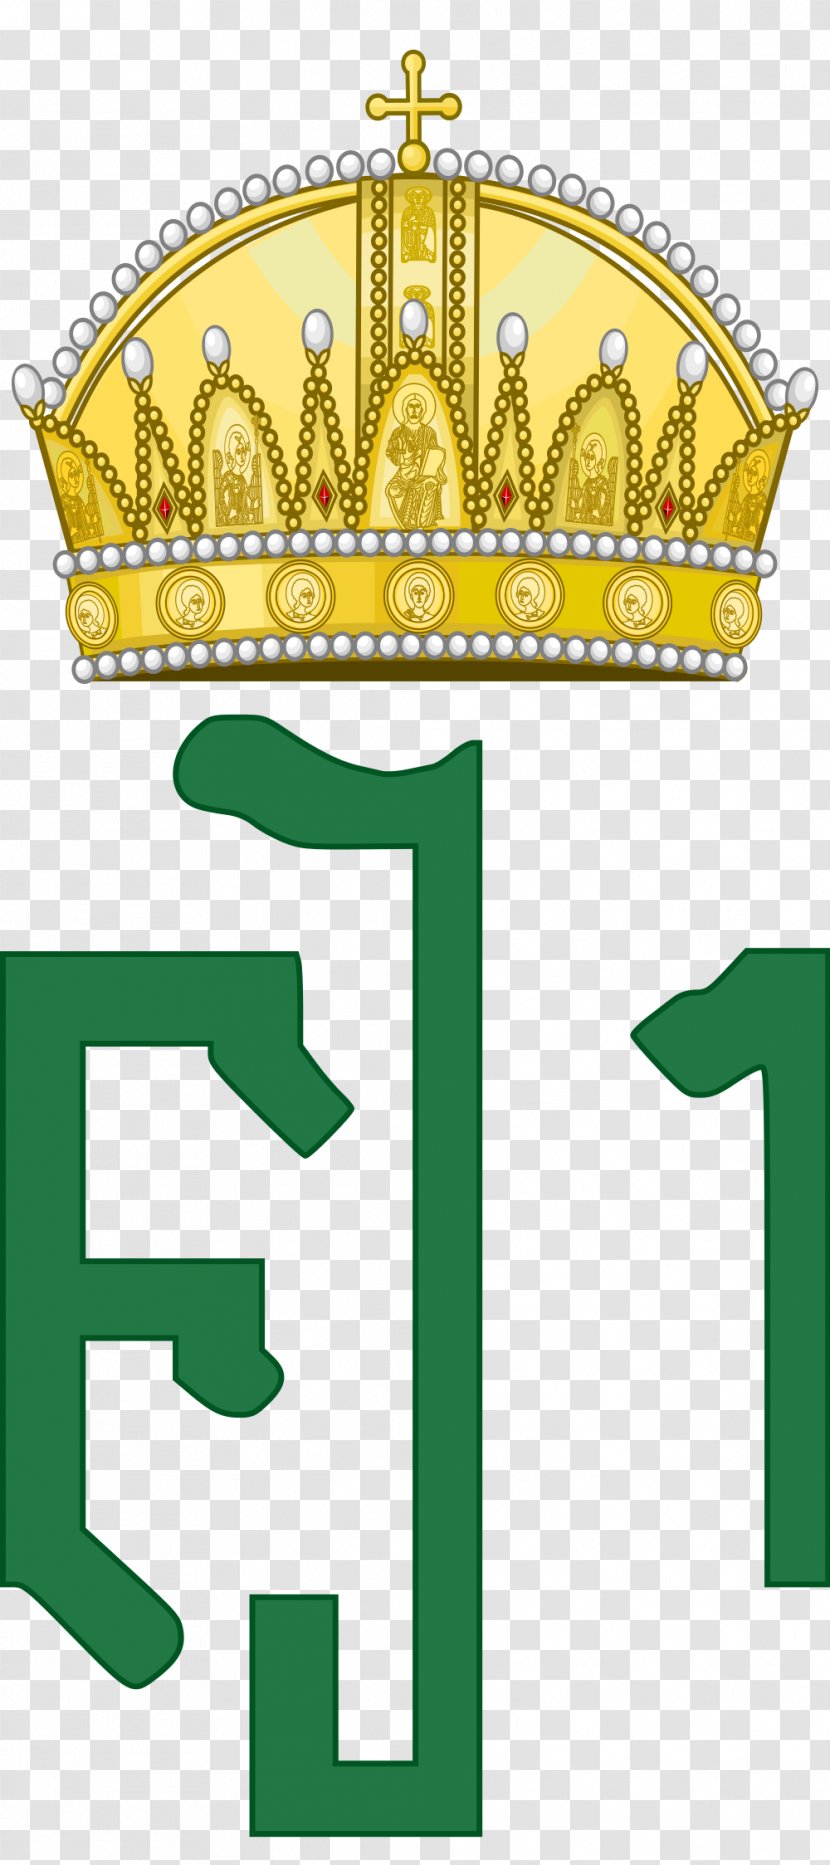 Royal Cypher King Of Hungary Monogram Emperor Clip Art - India Transparent PNG